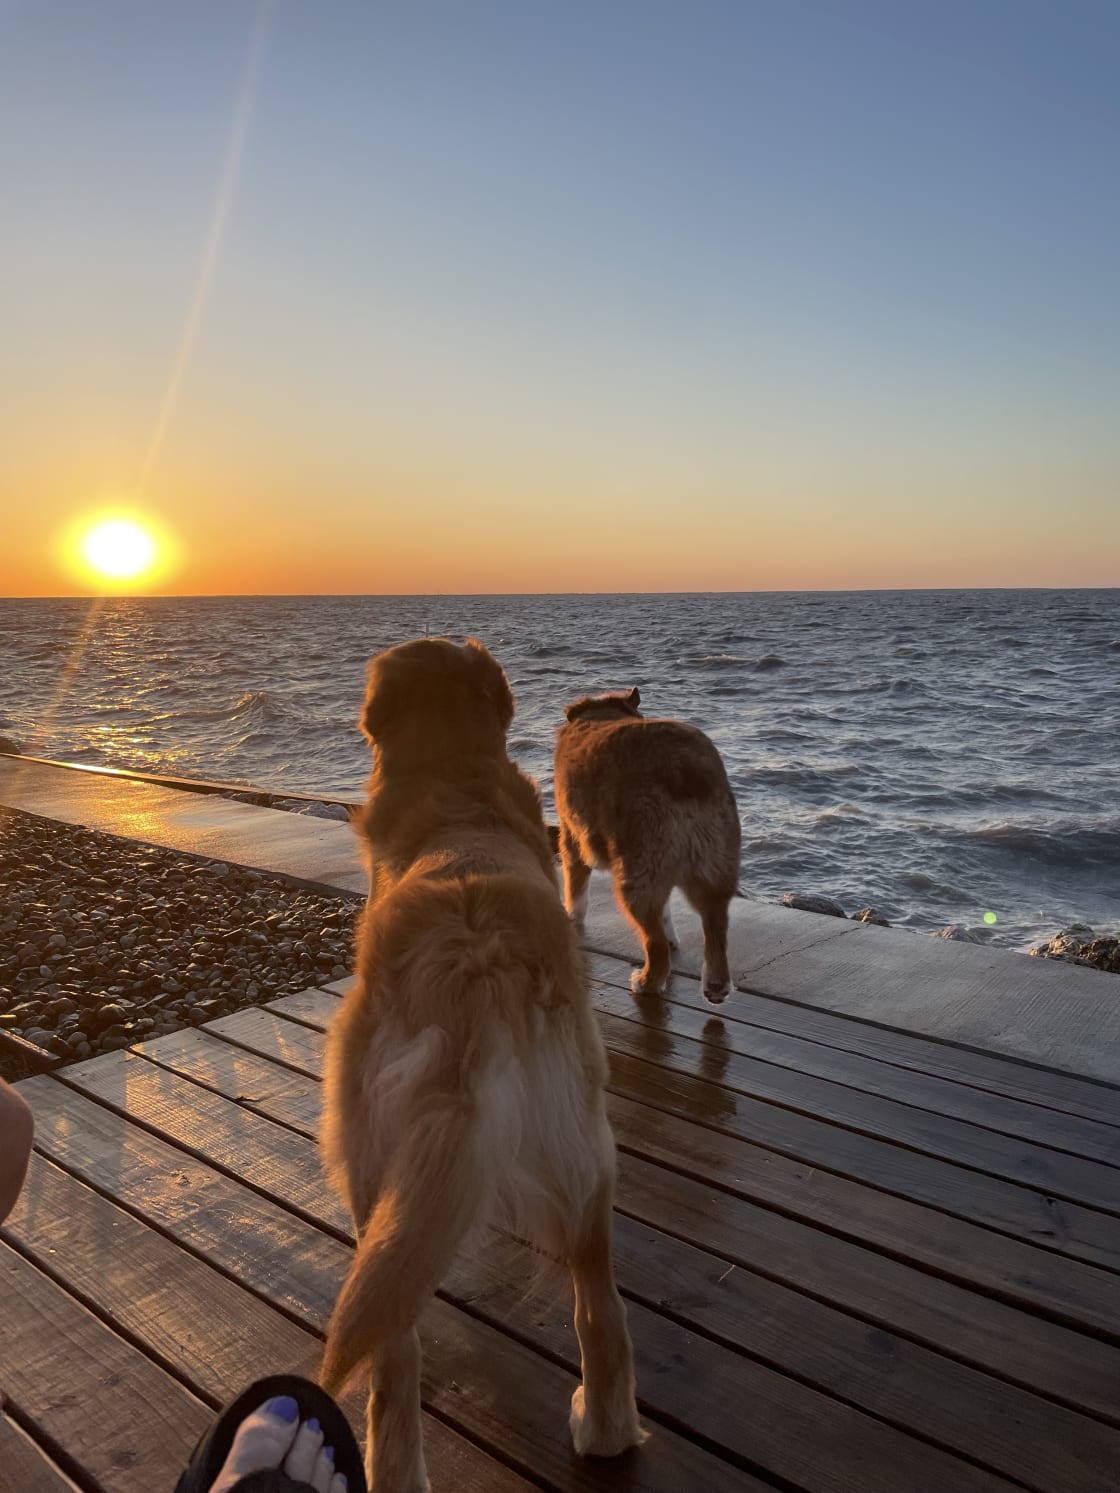 Even the dogs were impressed with the sunsets!!!!